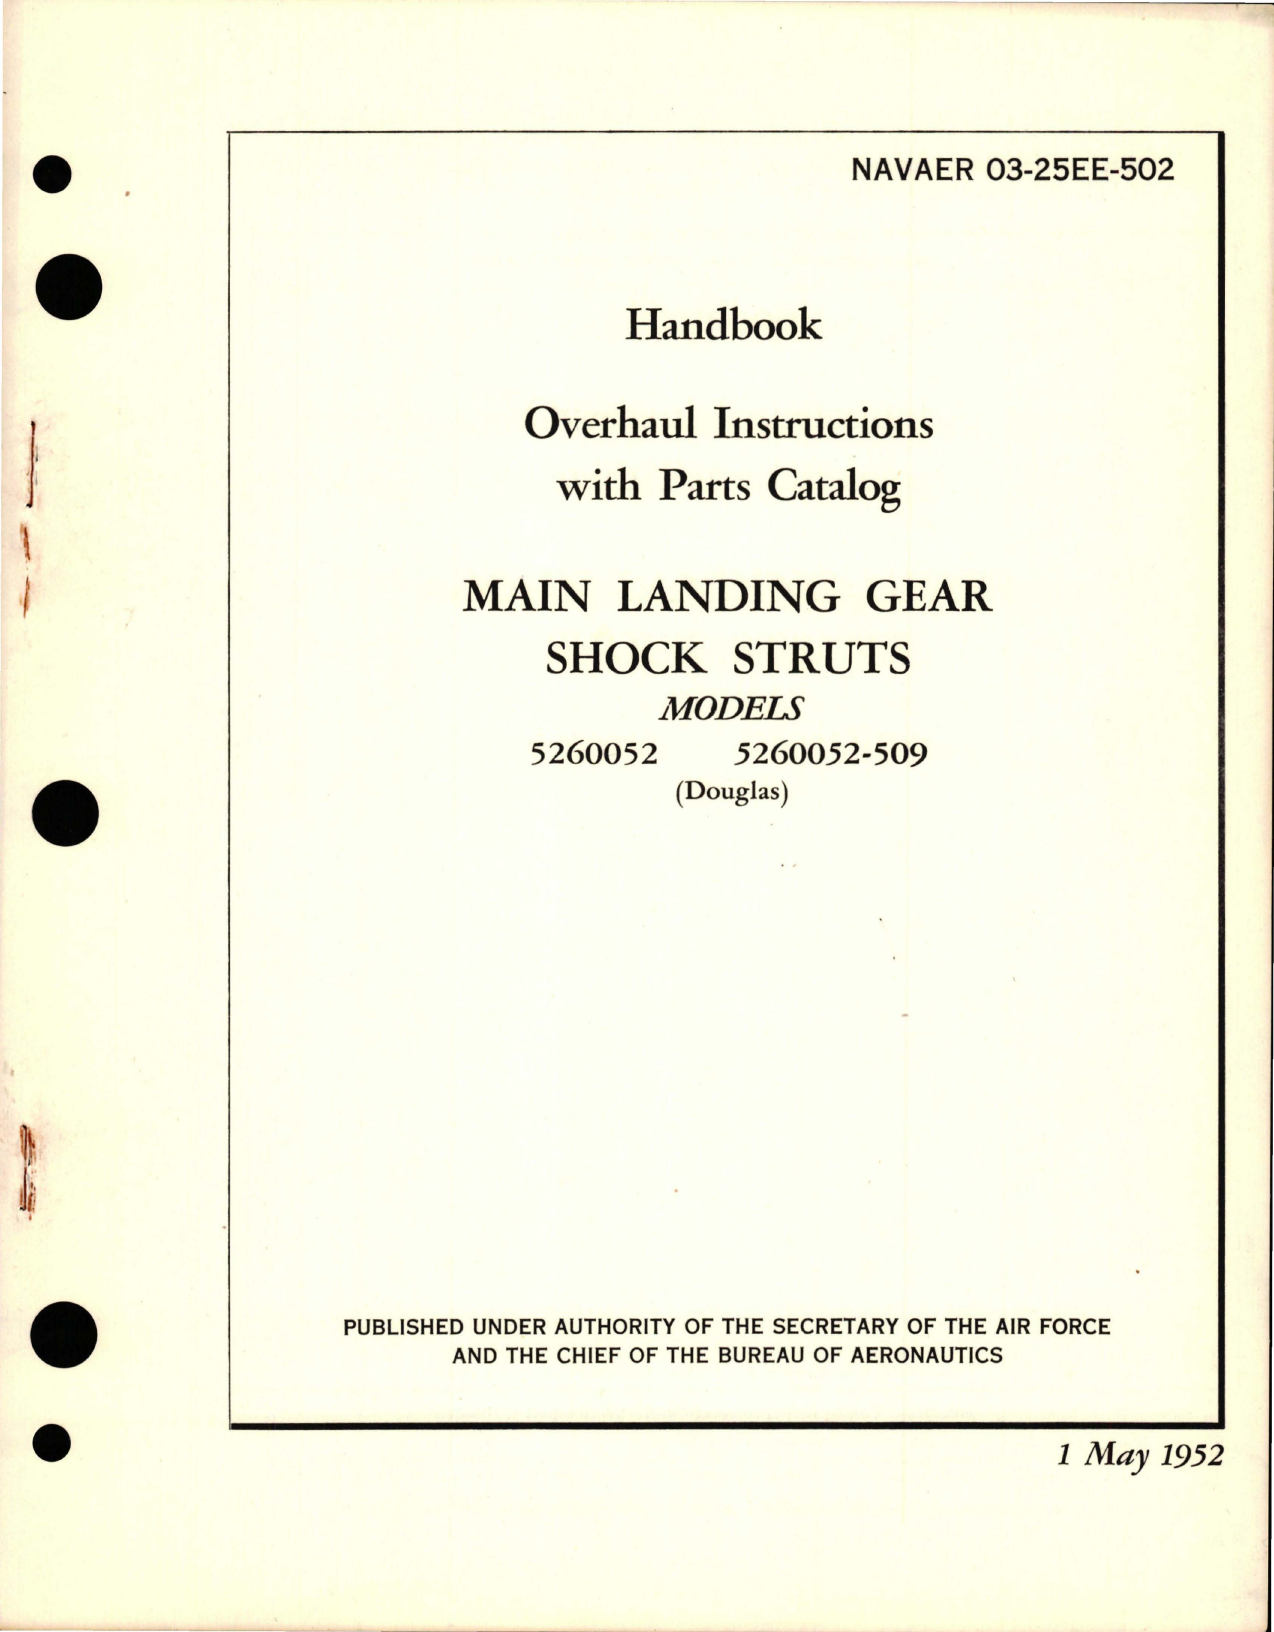 Sample page 1 from AirCorps Library document: Overhaul Instructions with Parts Catalog for Main Landing Gear Shock Struts - Models 5260052 and 5260052-509